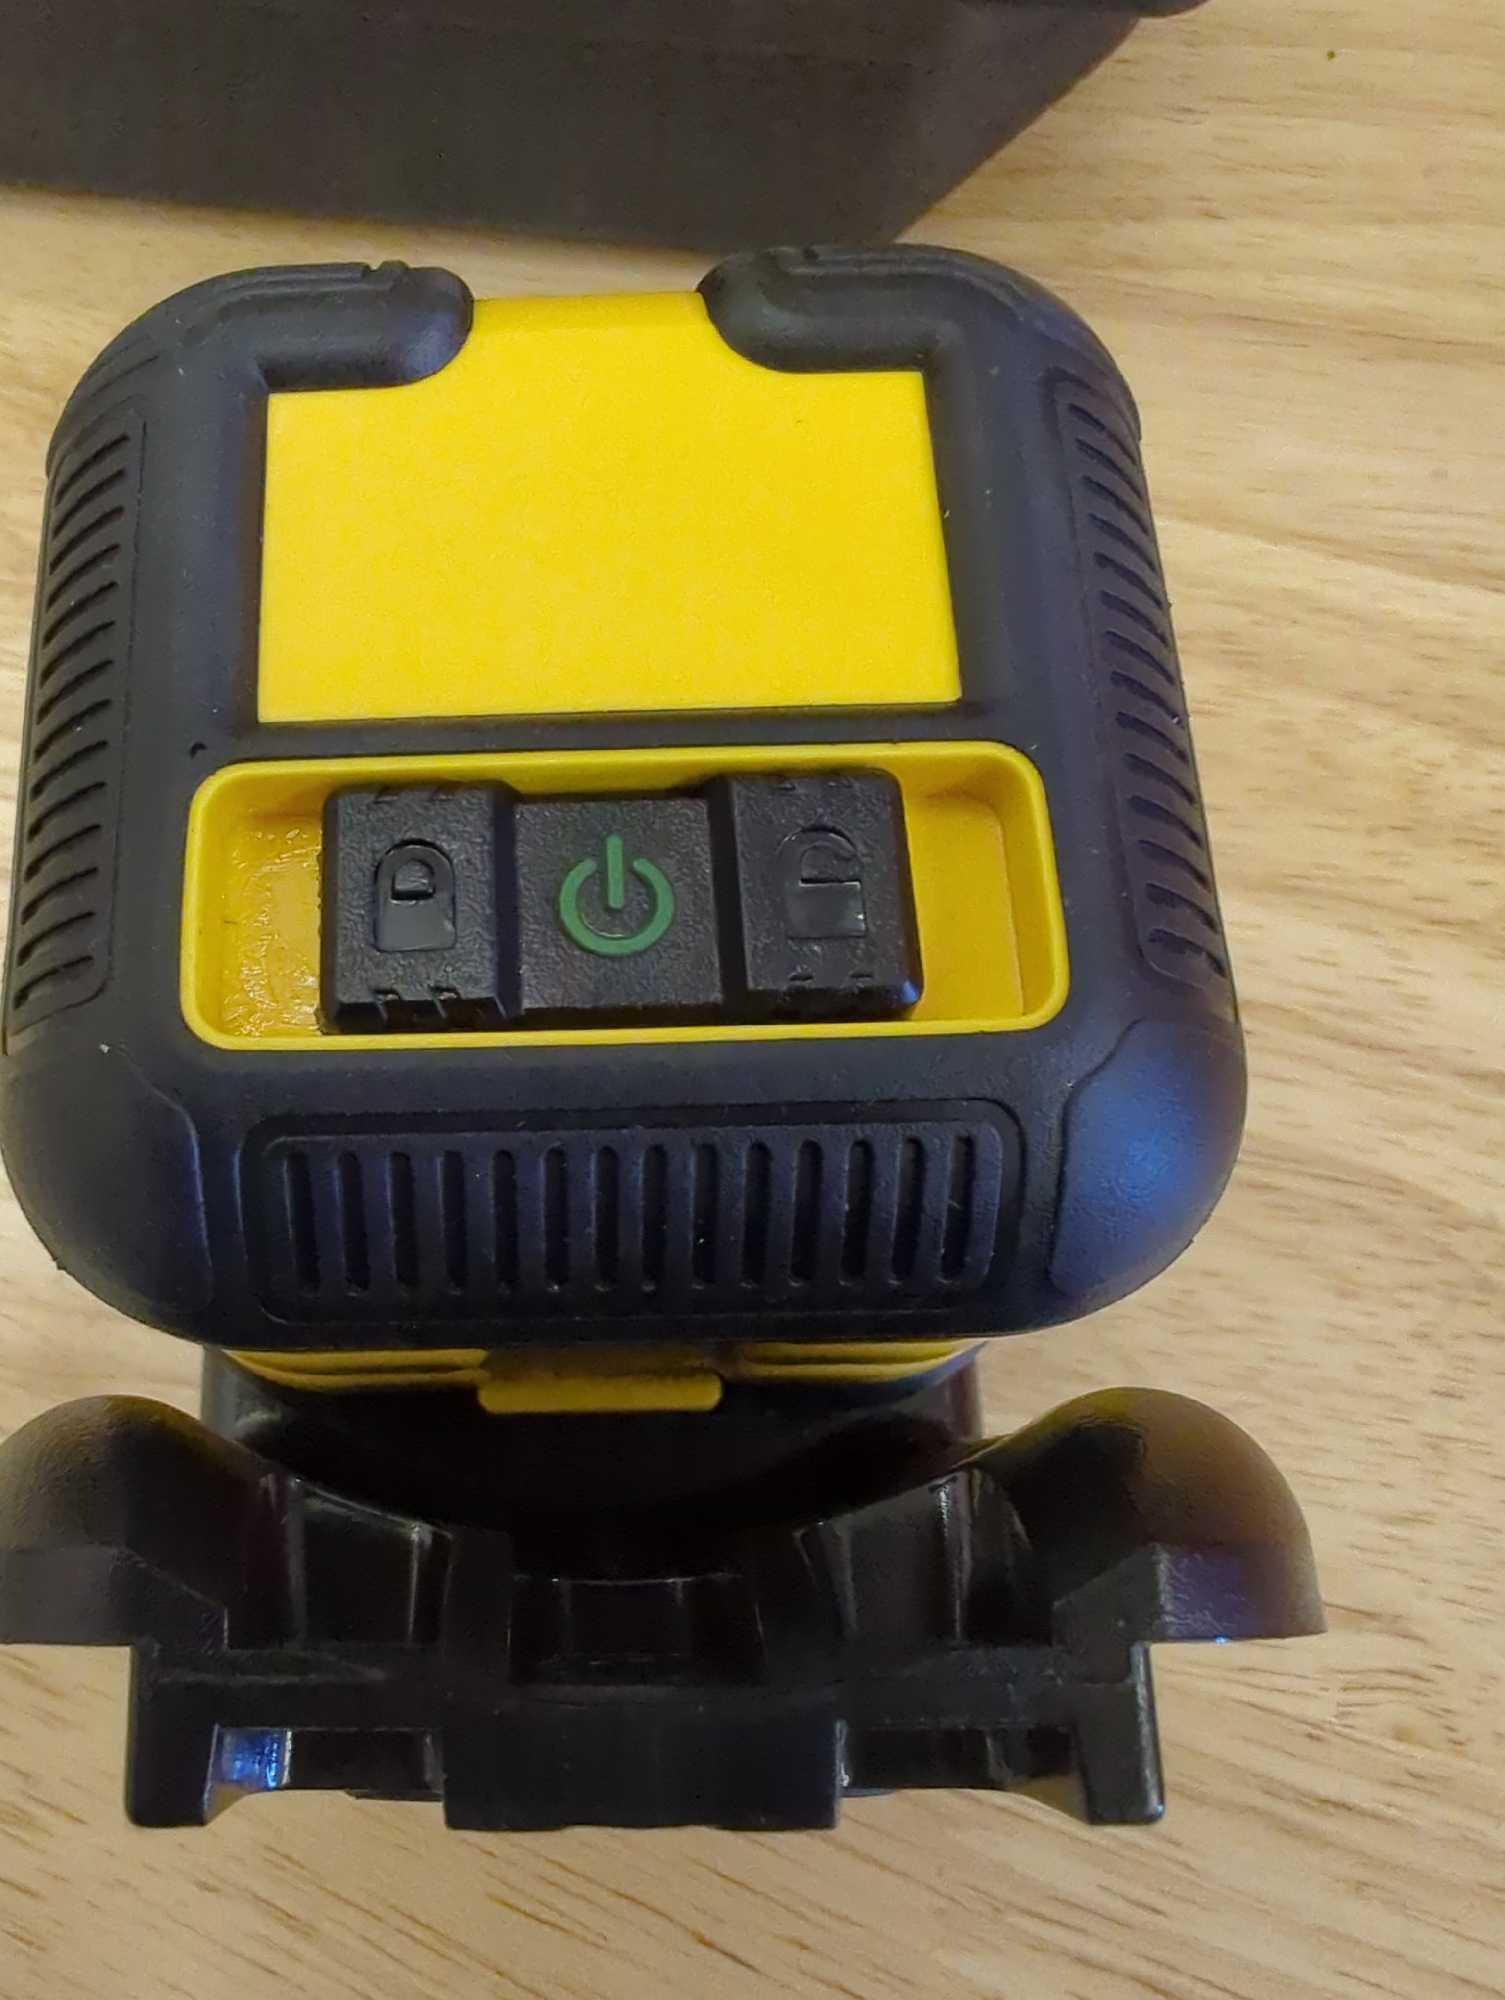 DEWALT 55 ft. Green Self-Leveling Cross Line Laser Level with (2) AA Batteries & Case, Appears to be